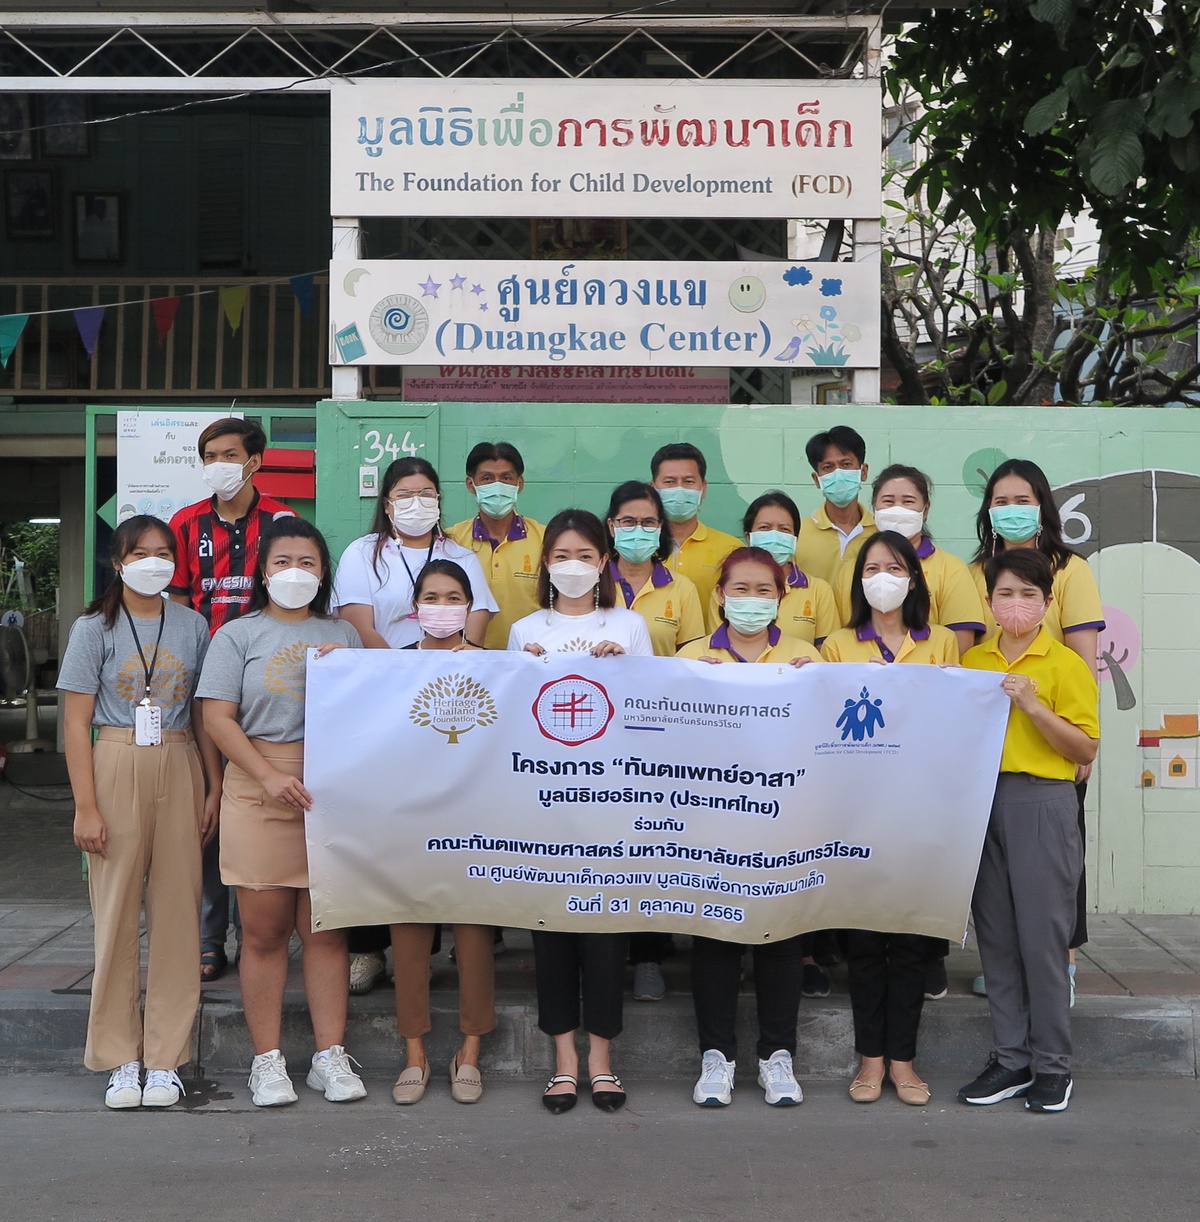 Heritage Thailand Foundation with Srinakharinwirot University Brings Dentist Volunteer Campaign to The Foundation for Child Development at Duangkae